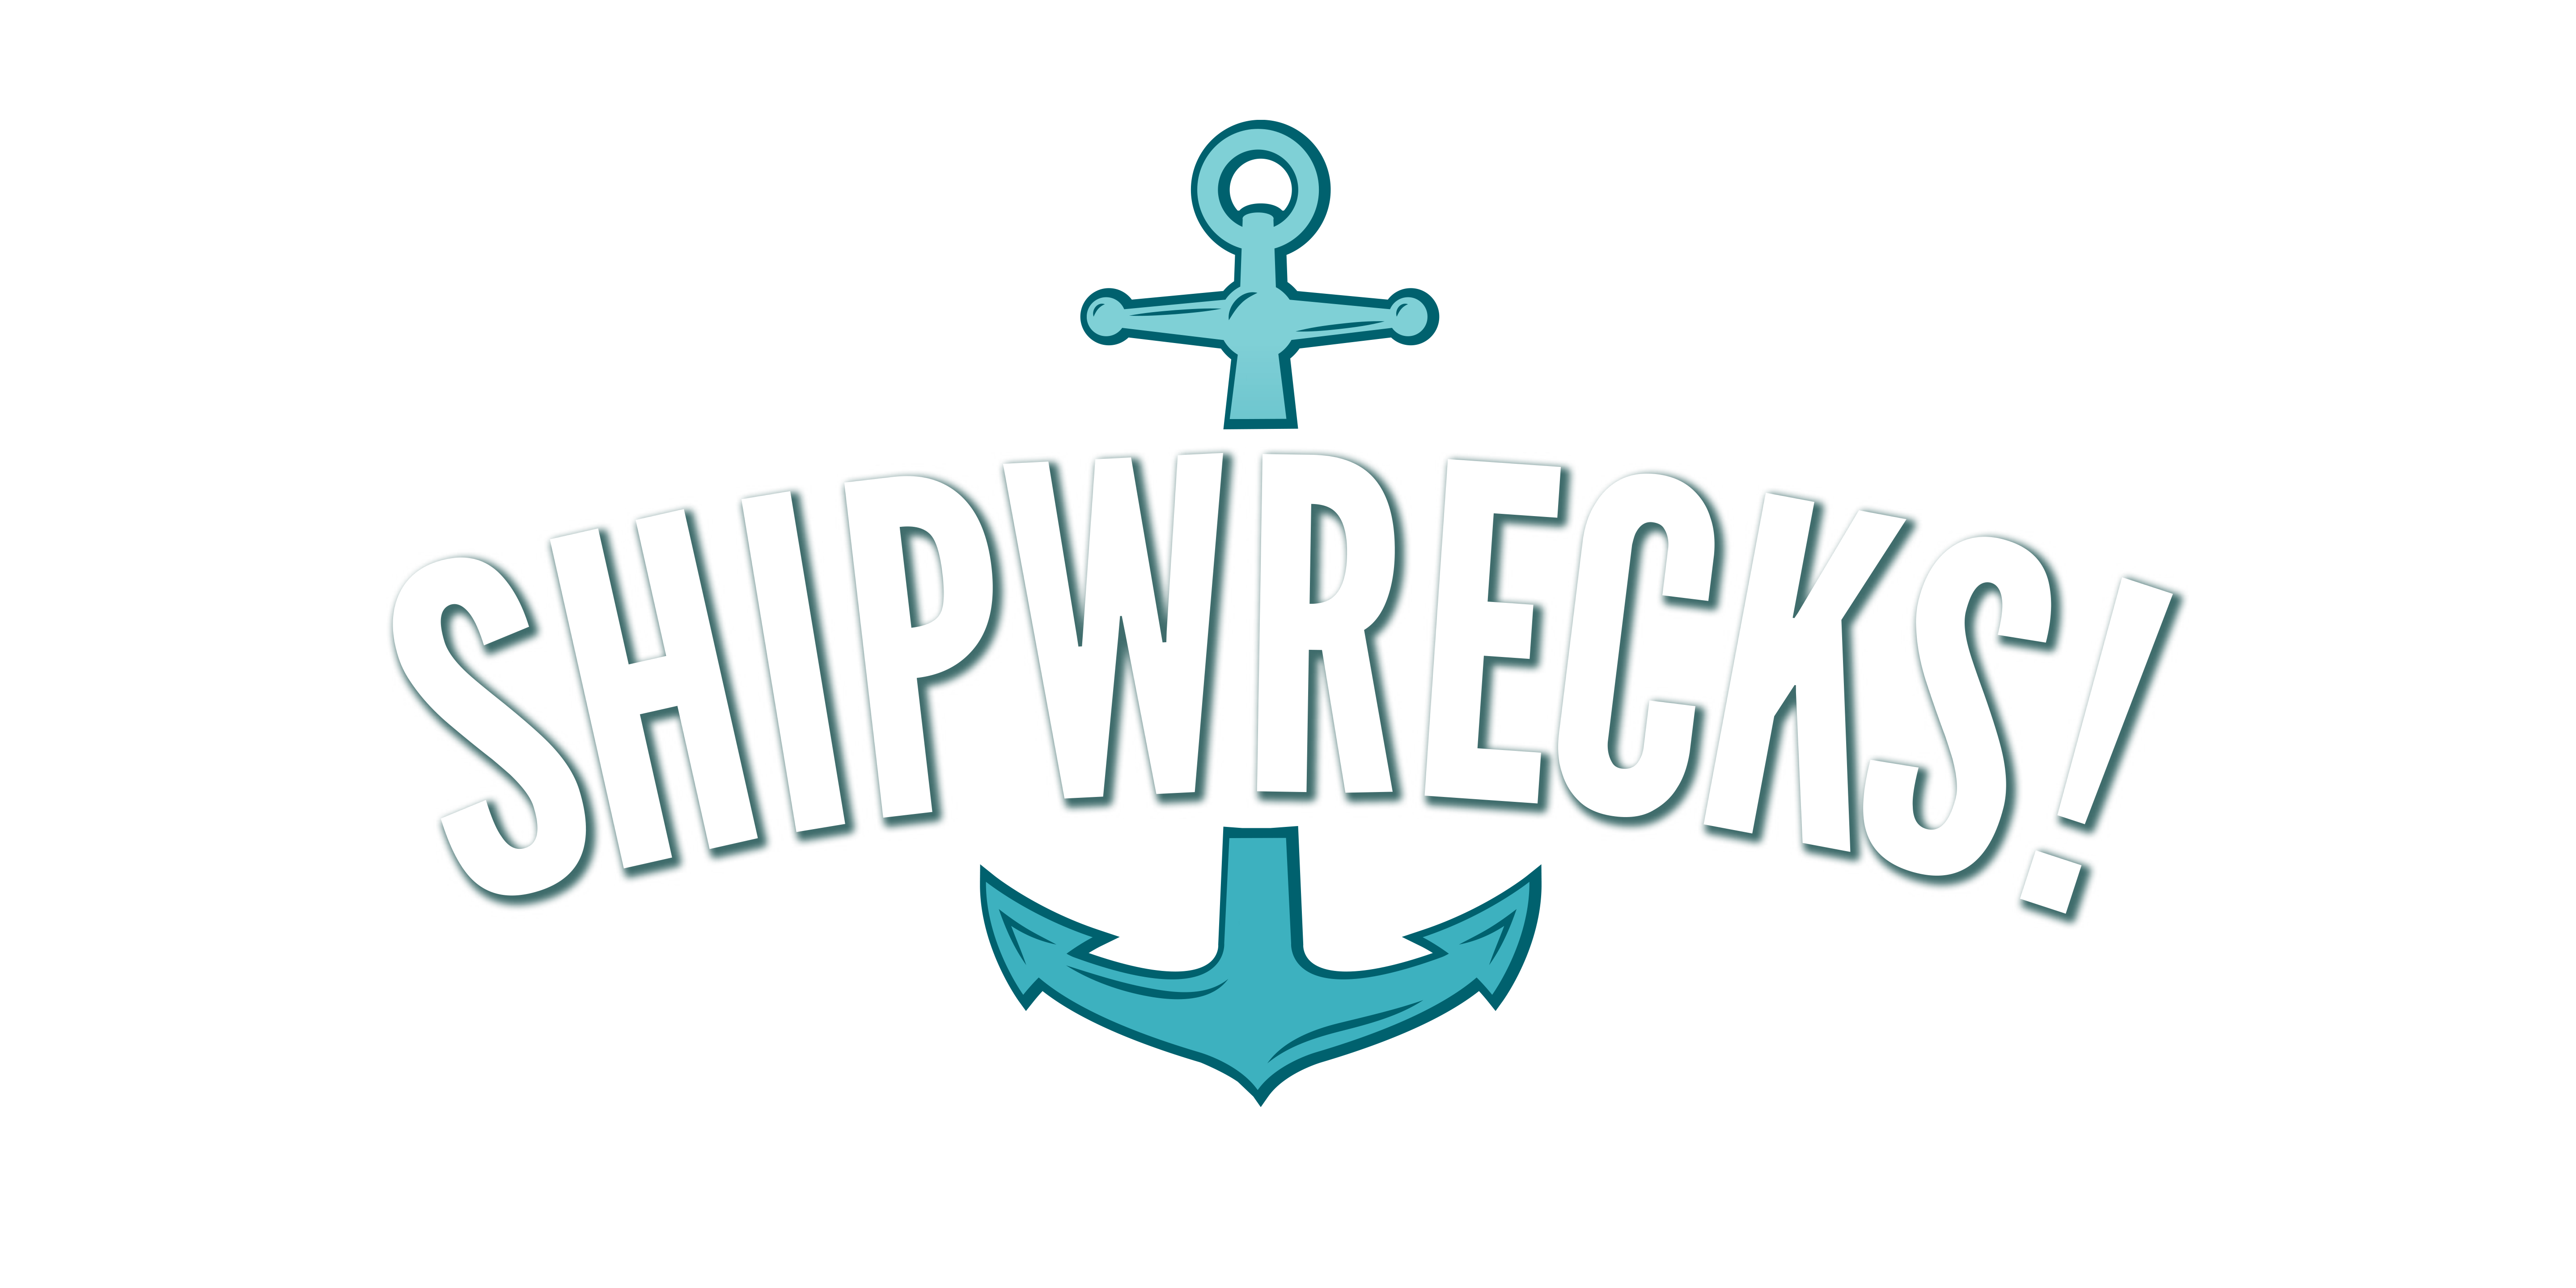 the word "Shipwrecks" with an illustrated anchor cutting down the middle of the word